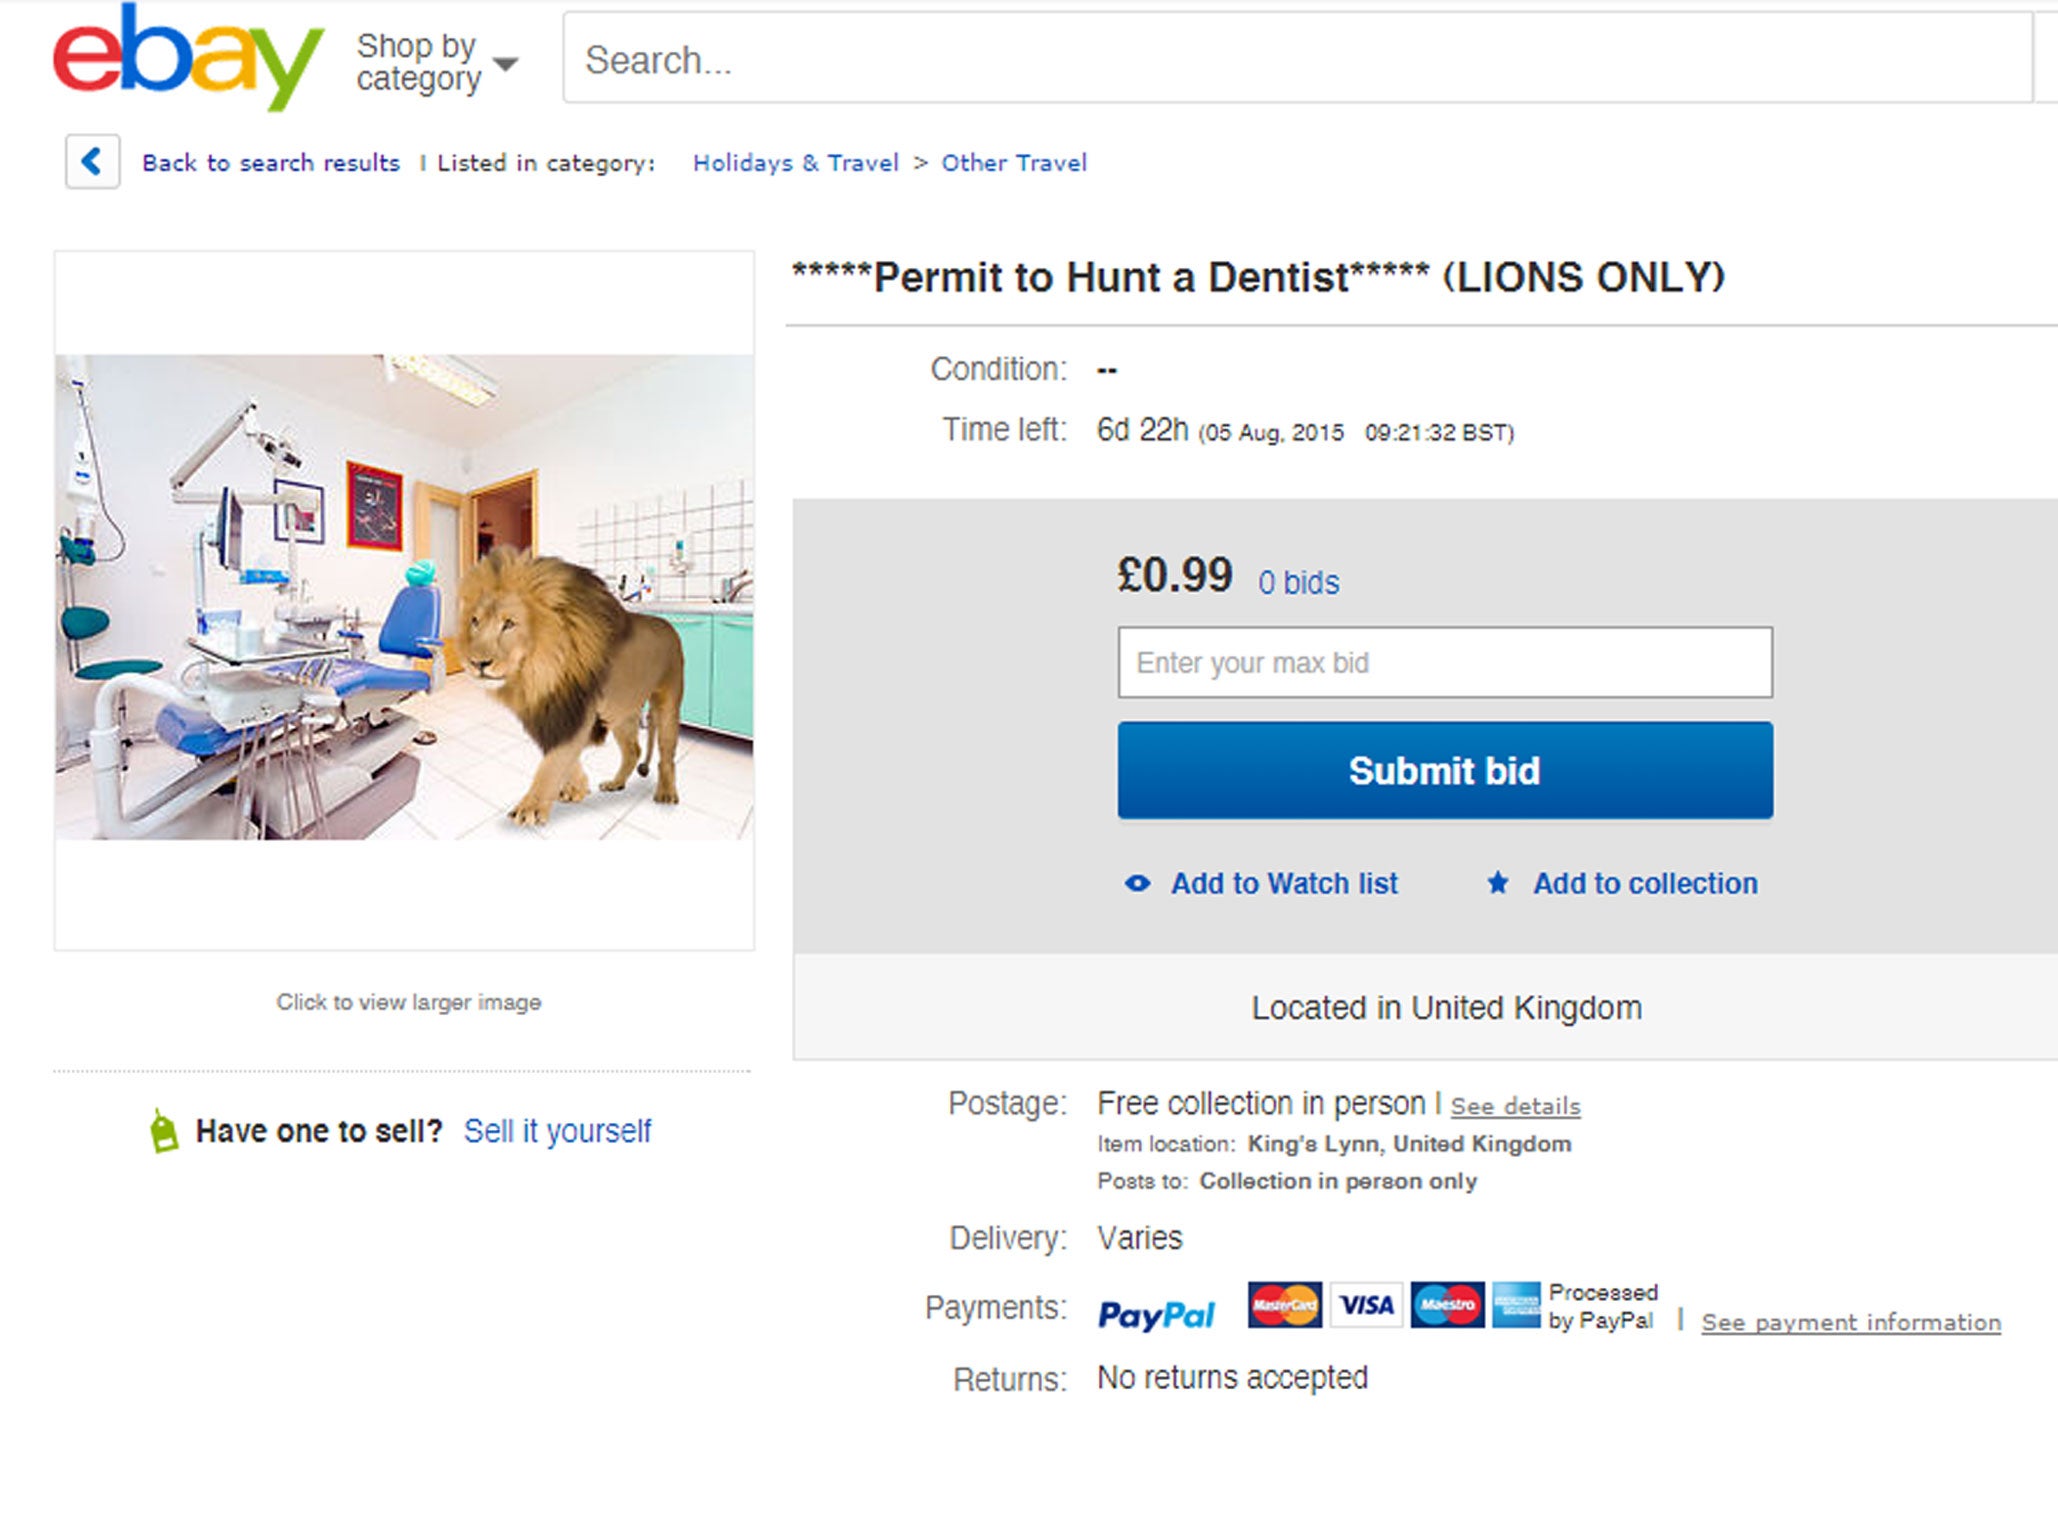 A mock listing for a permit to hunt a dentist on eBay